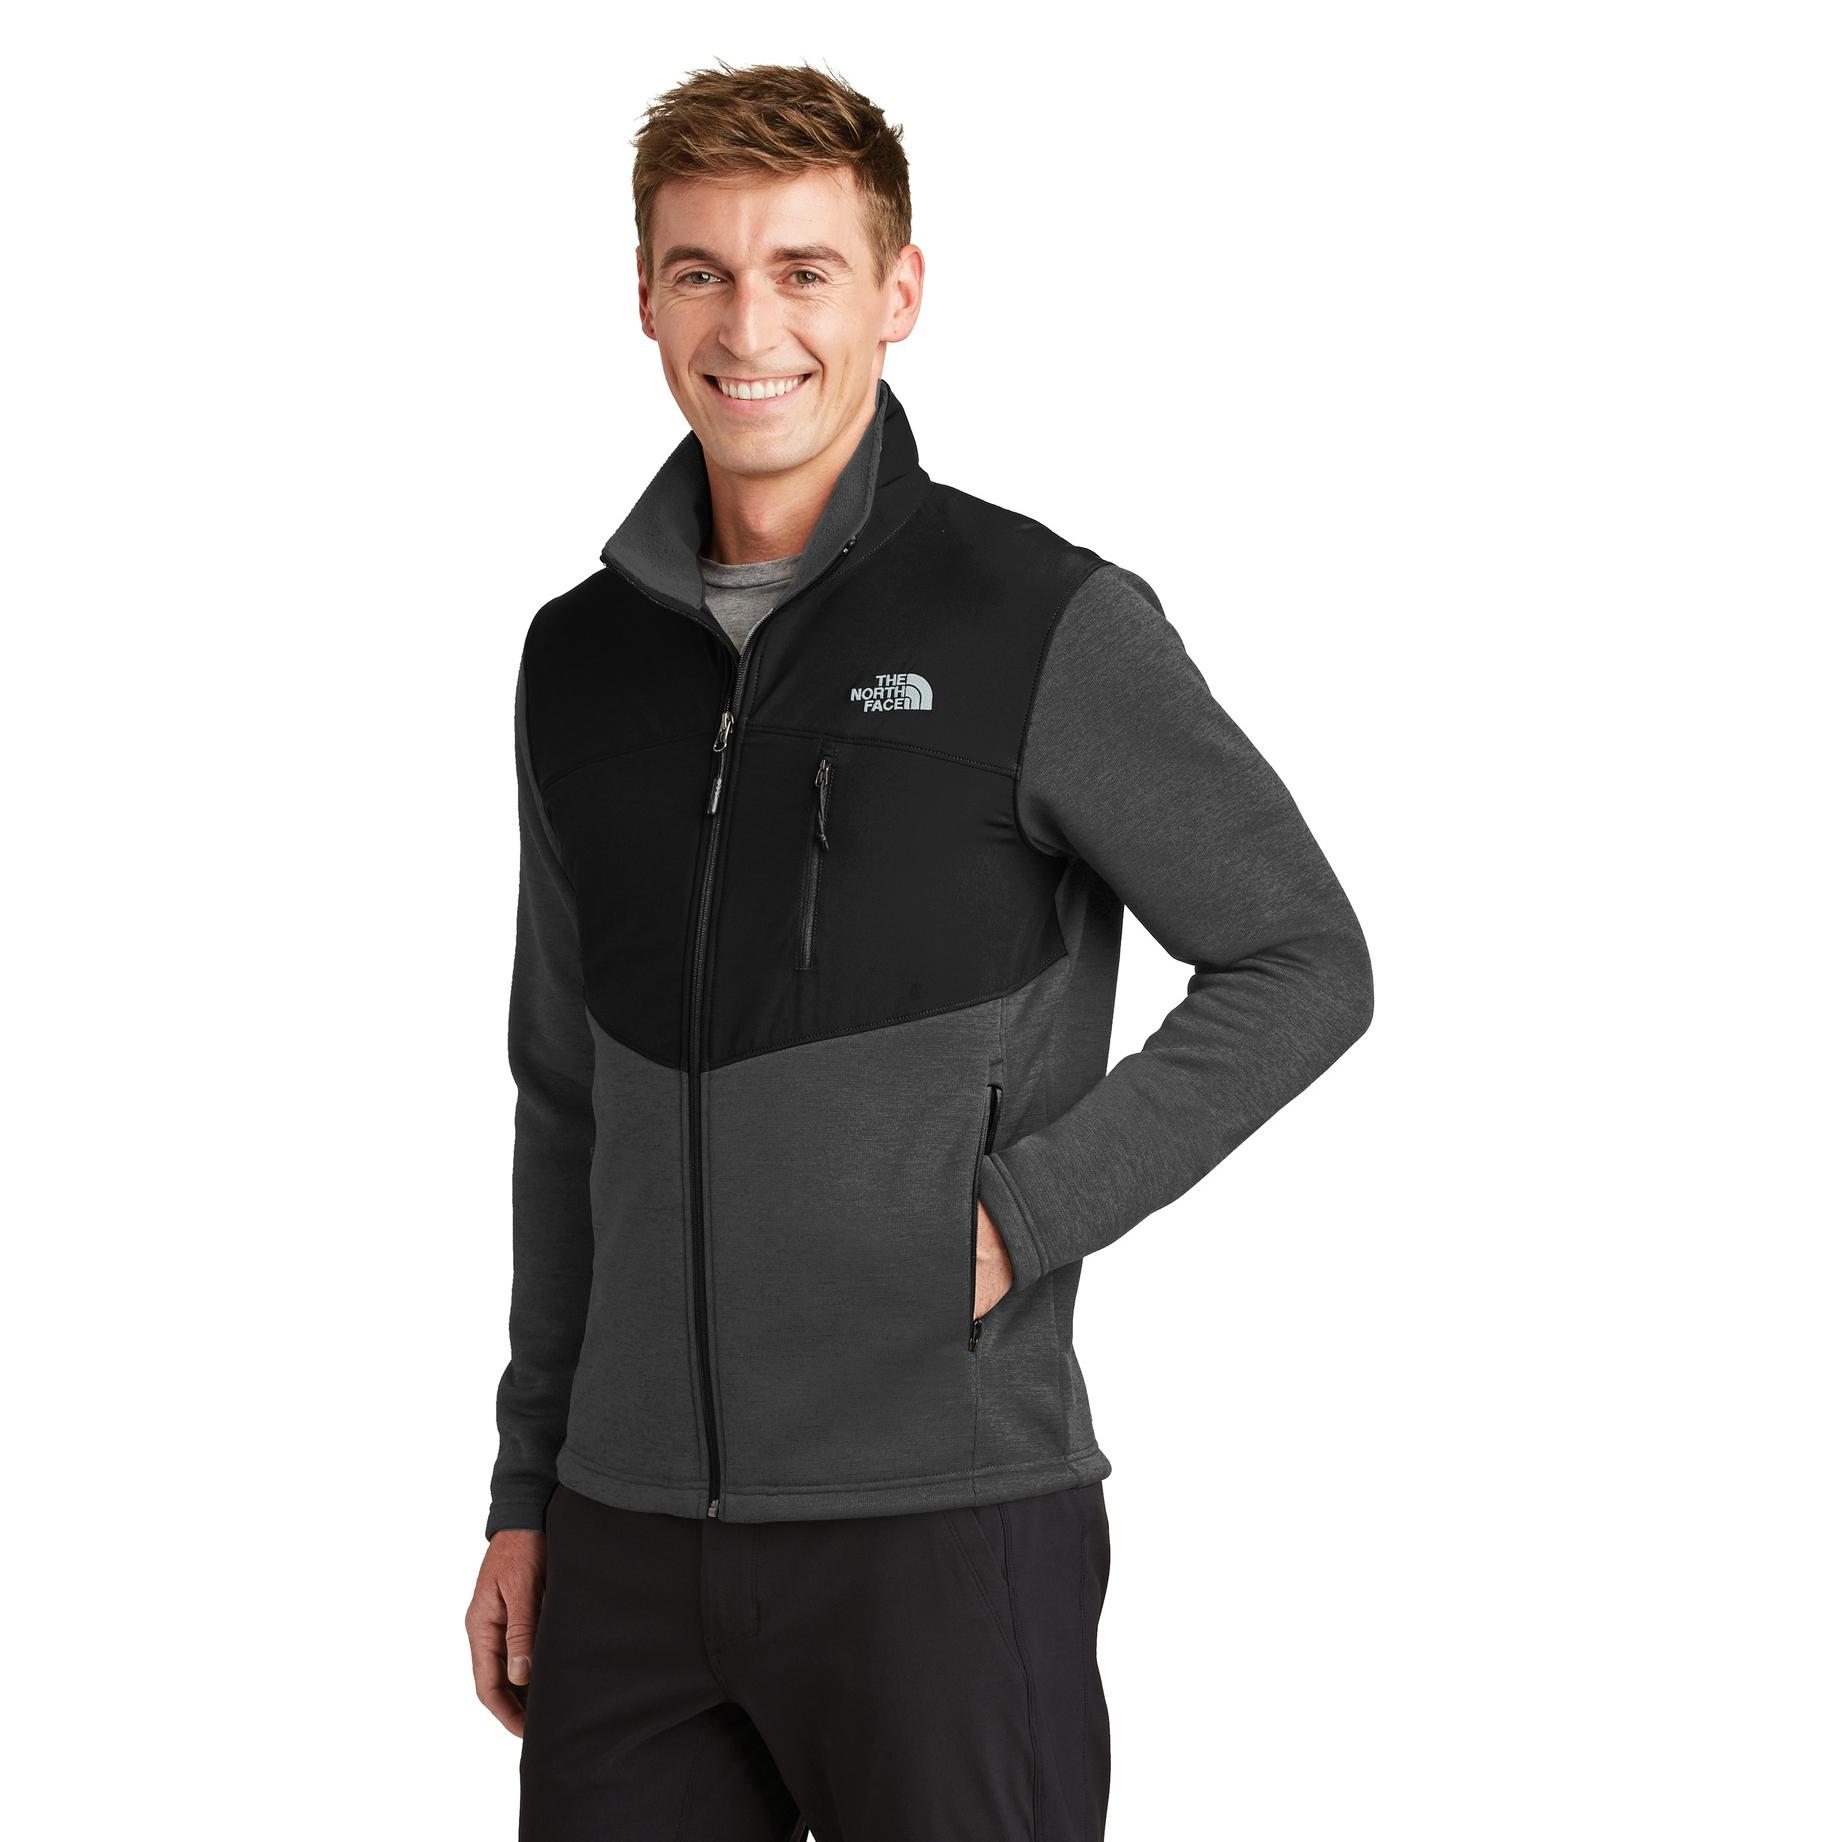 The North Face NF0A3LH6 Far North Fleece Jacket - Black Heather | Full ...